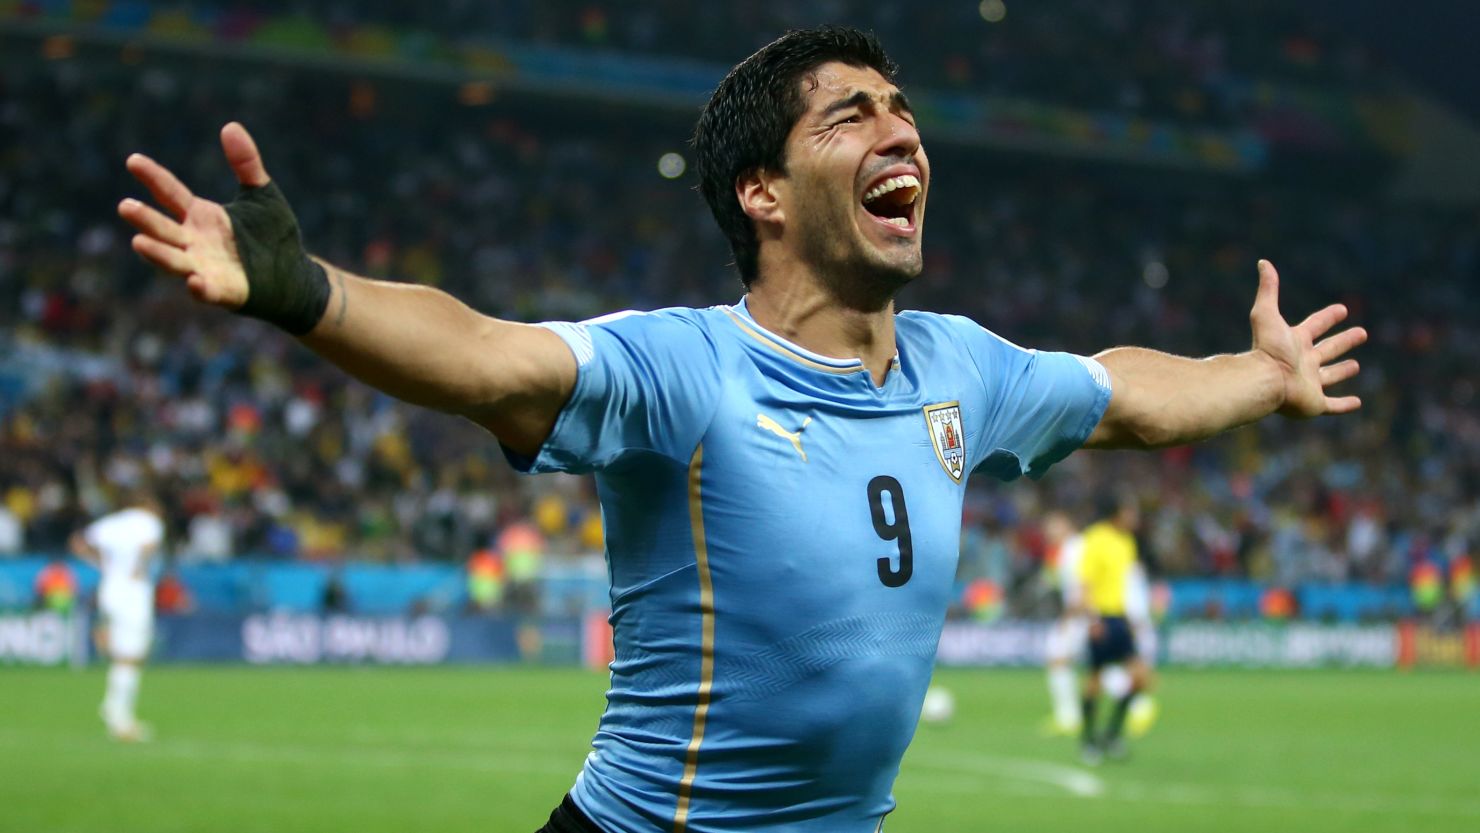 Luis Suarez of Uruguay celebrates after scoring his team's second goal during the 2014 FIFA World Cup Brazil Group D match between Uruguay and England at Arena de Sao Paulo on June 19, 2014 in Sao Paulo, Brazil. 